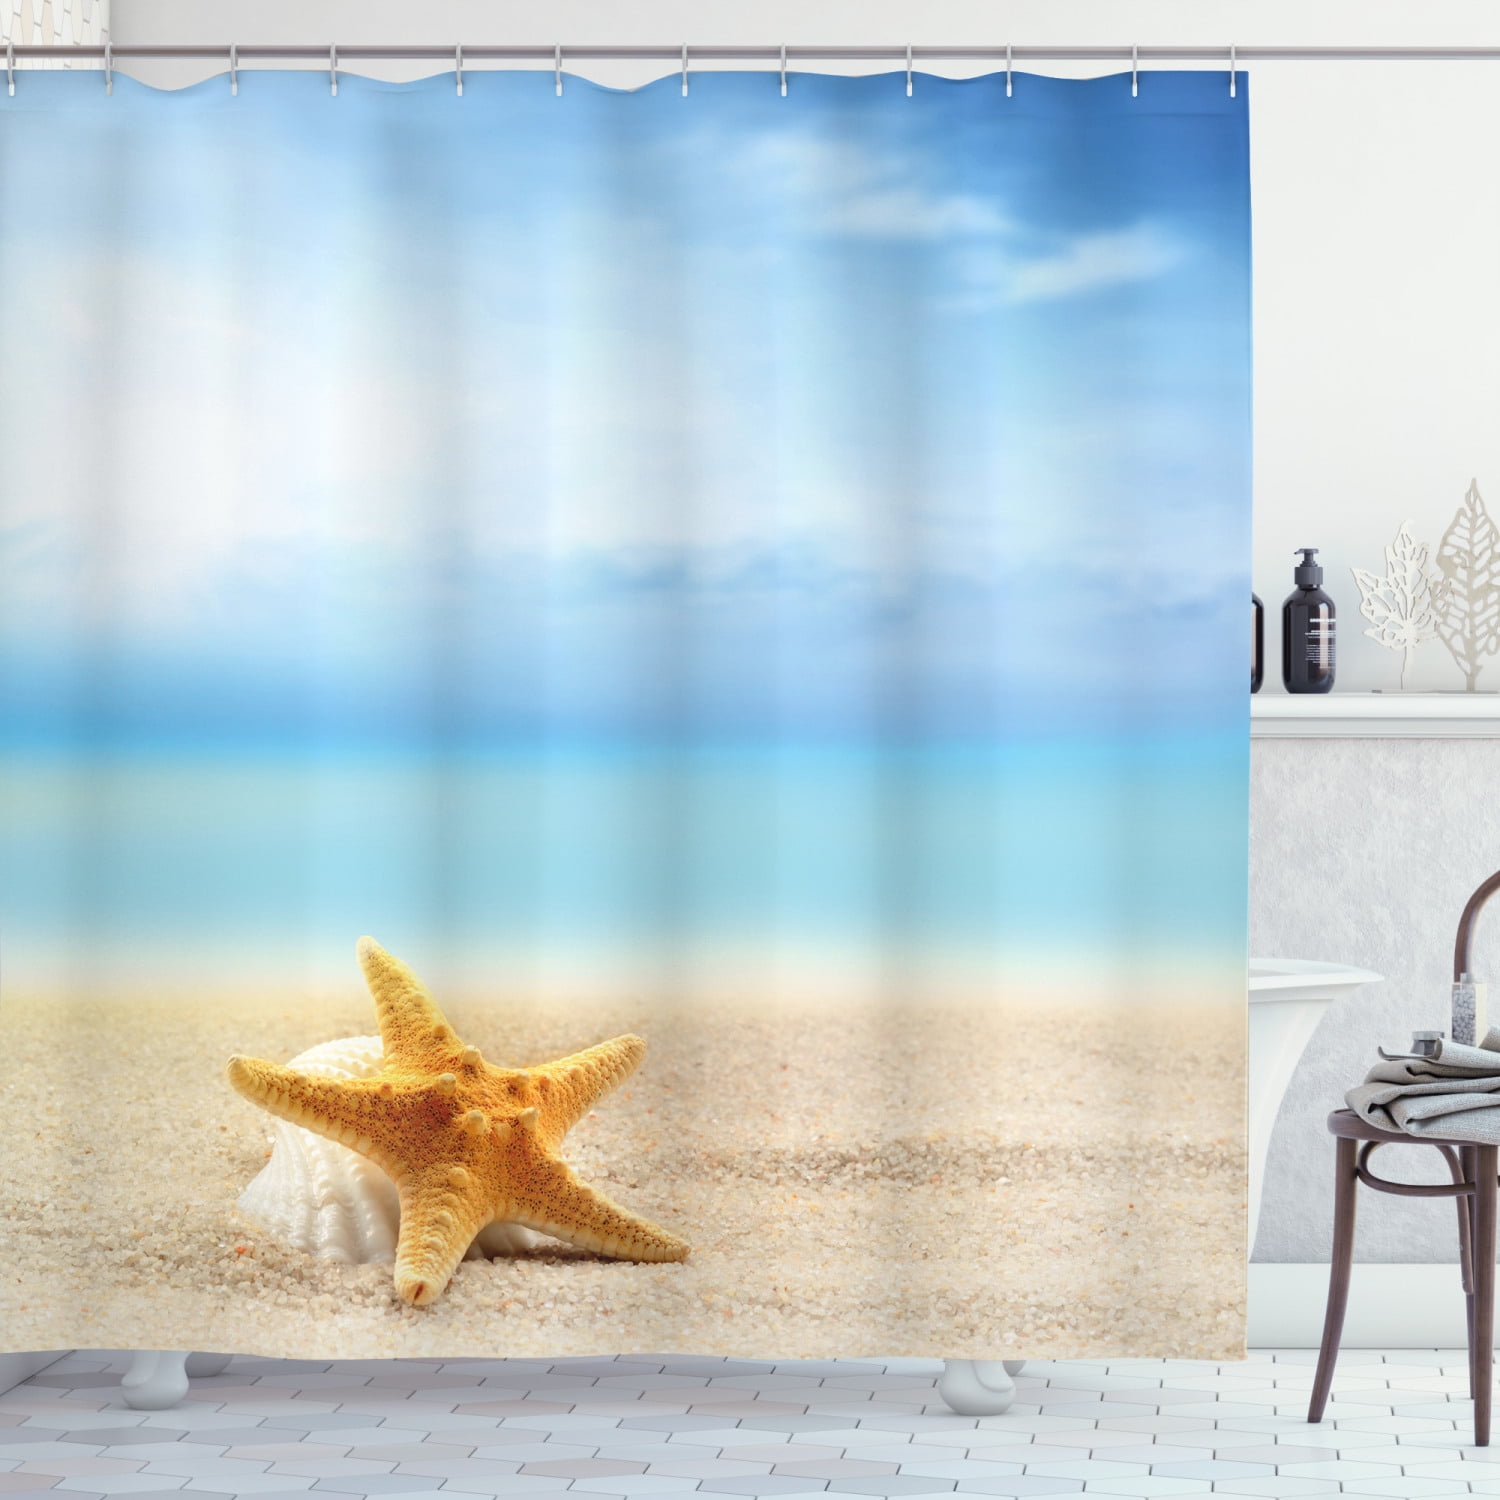 Starfish Shower Curtain, Scallop Seashell and Starfish Close Up Sandy Beach  Idyllic Ocean Backdrop Design, Fabric Bathroom Set with Hooks, 69W X 75L  Inches Long, Multicolor, by Ambesonne - Walmart.com